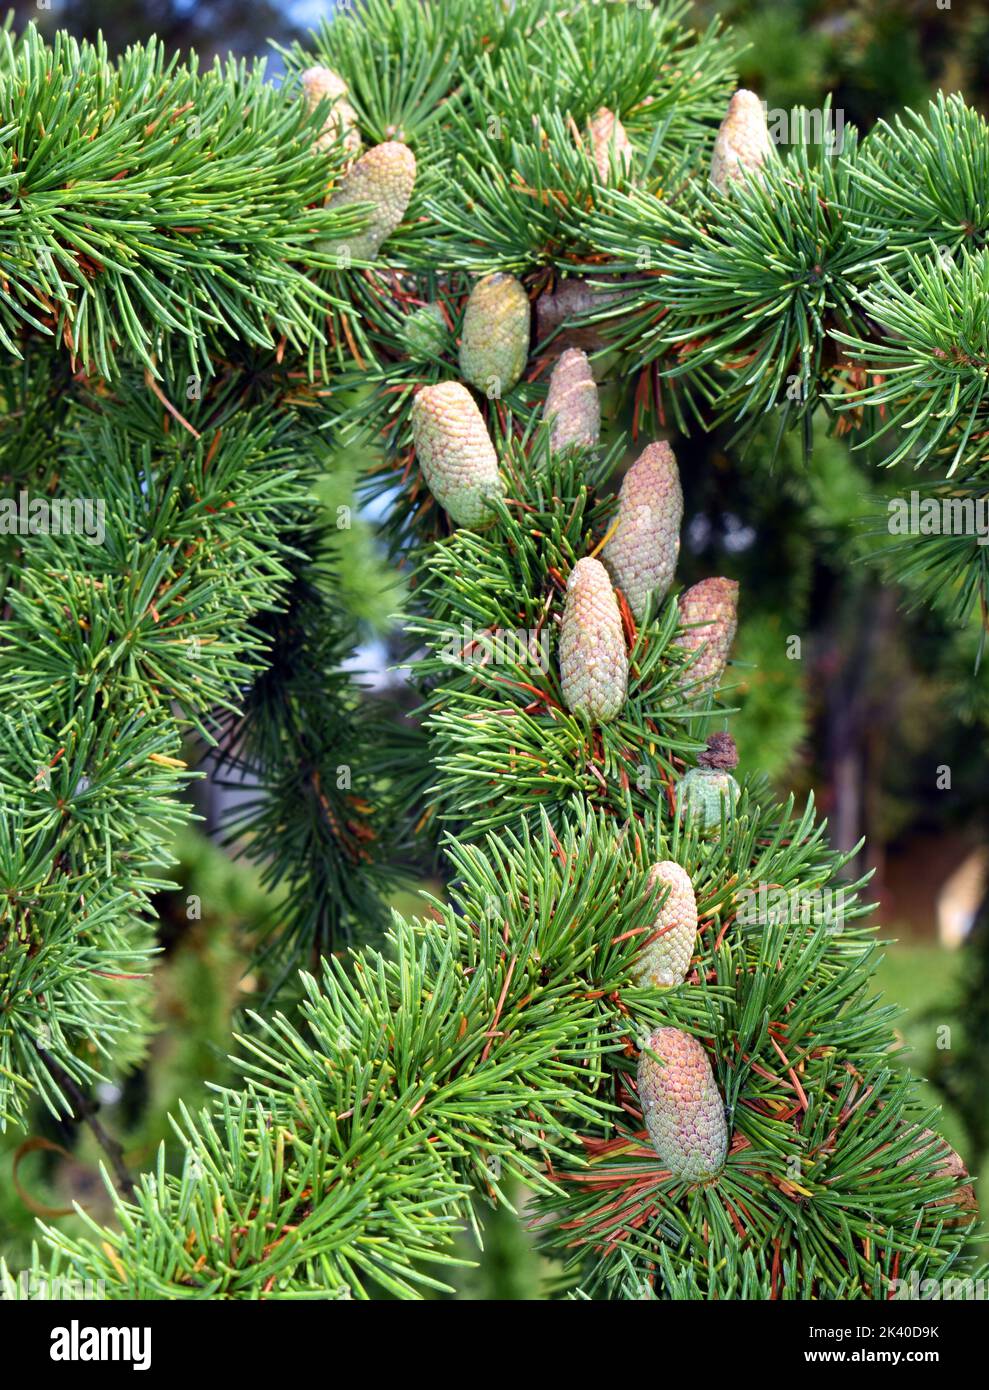 A cedar (Cedrus libani) showing its leaves and female cones. Arboretum of the University of the Basque Country. Leioa. Spain Stock Photo